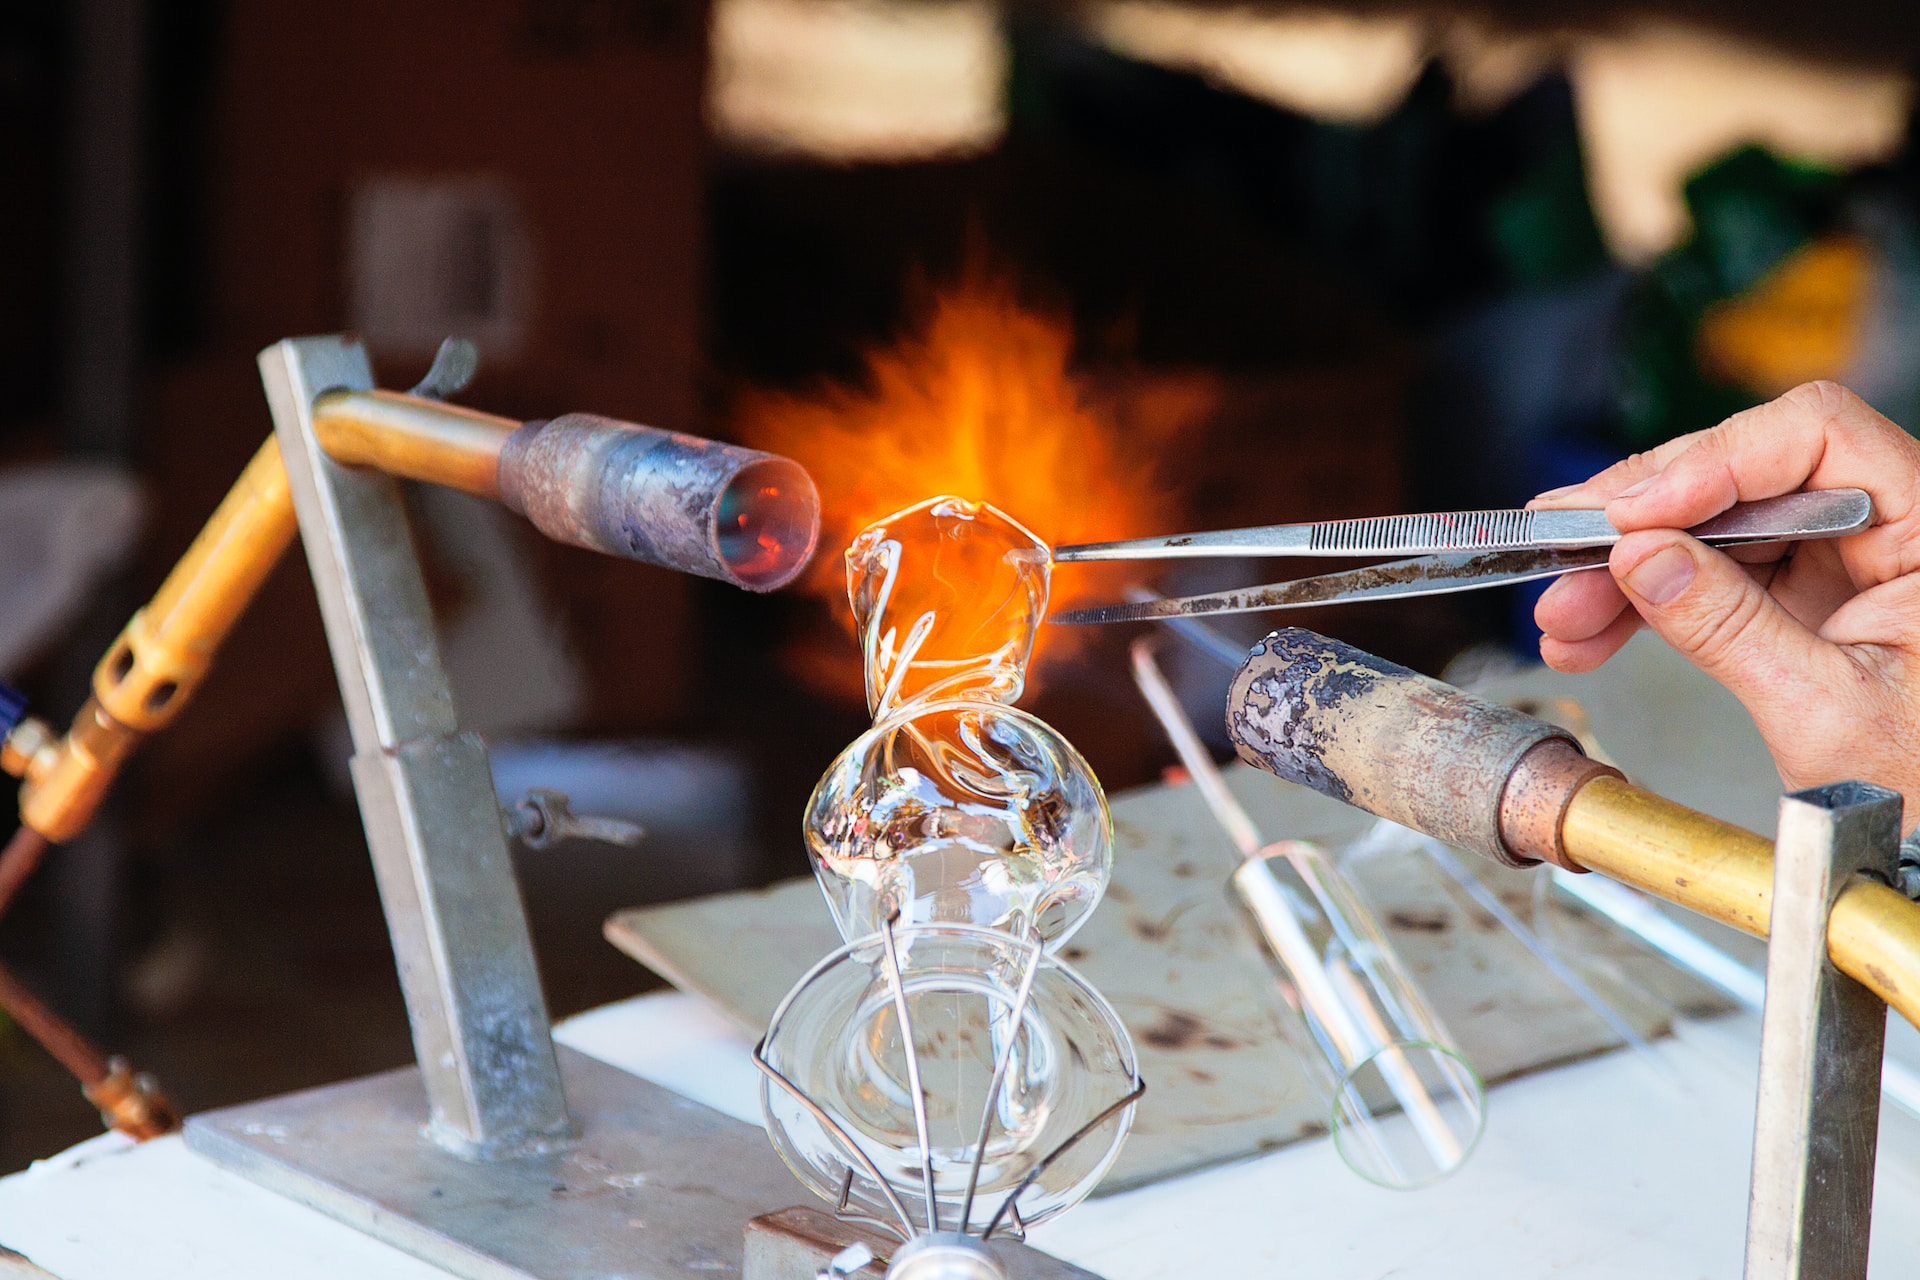 A piece of twisted glassware between two gas flames, the mouth on fire, and a hand on the right holding a pair of tweezers touching the top